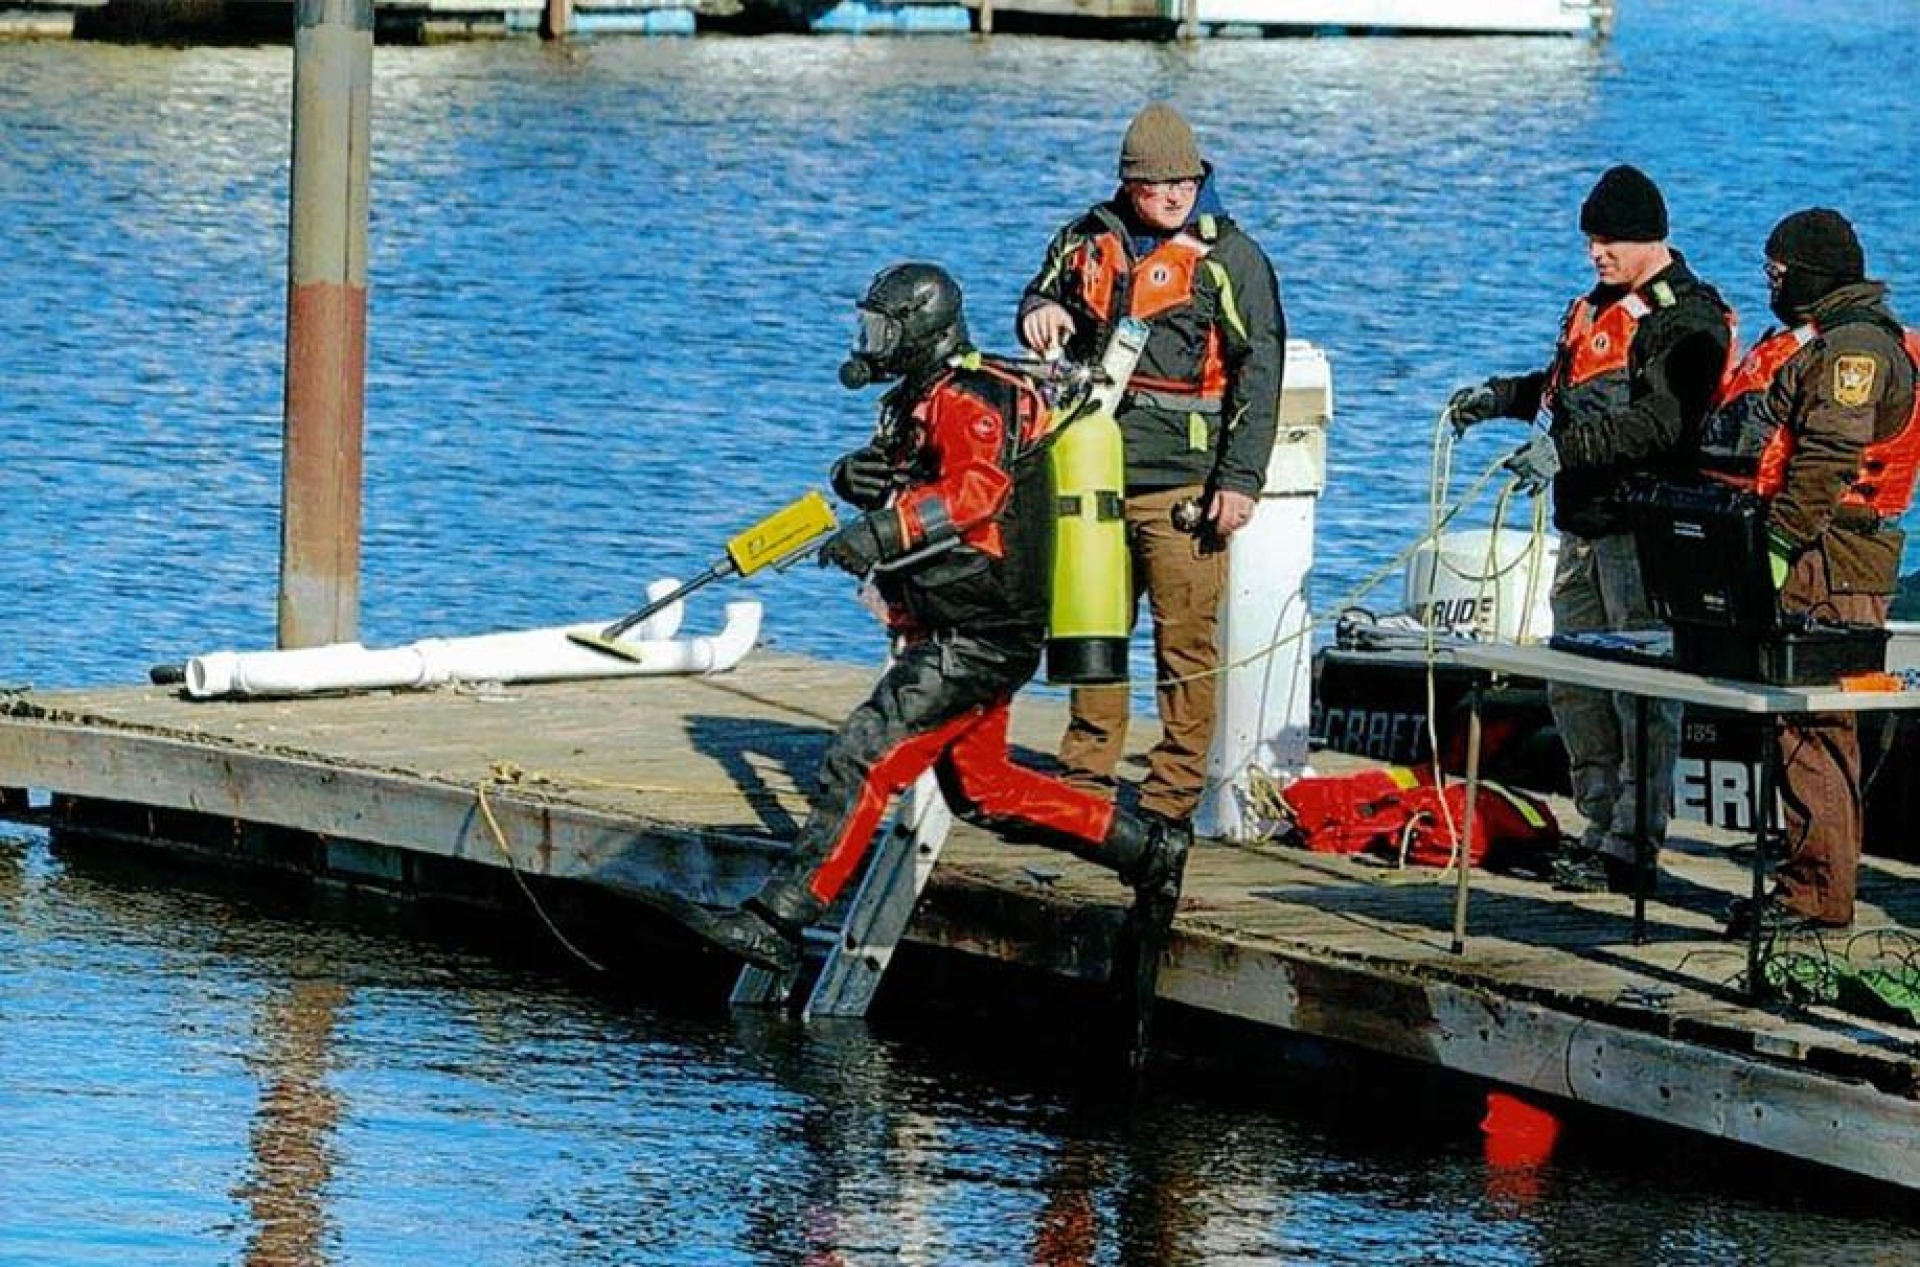 A dive/resue team member jumping off a dock into water with dive equipment on while others observe.